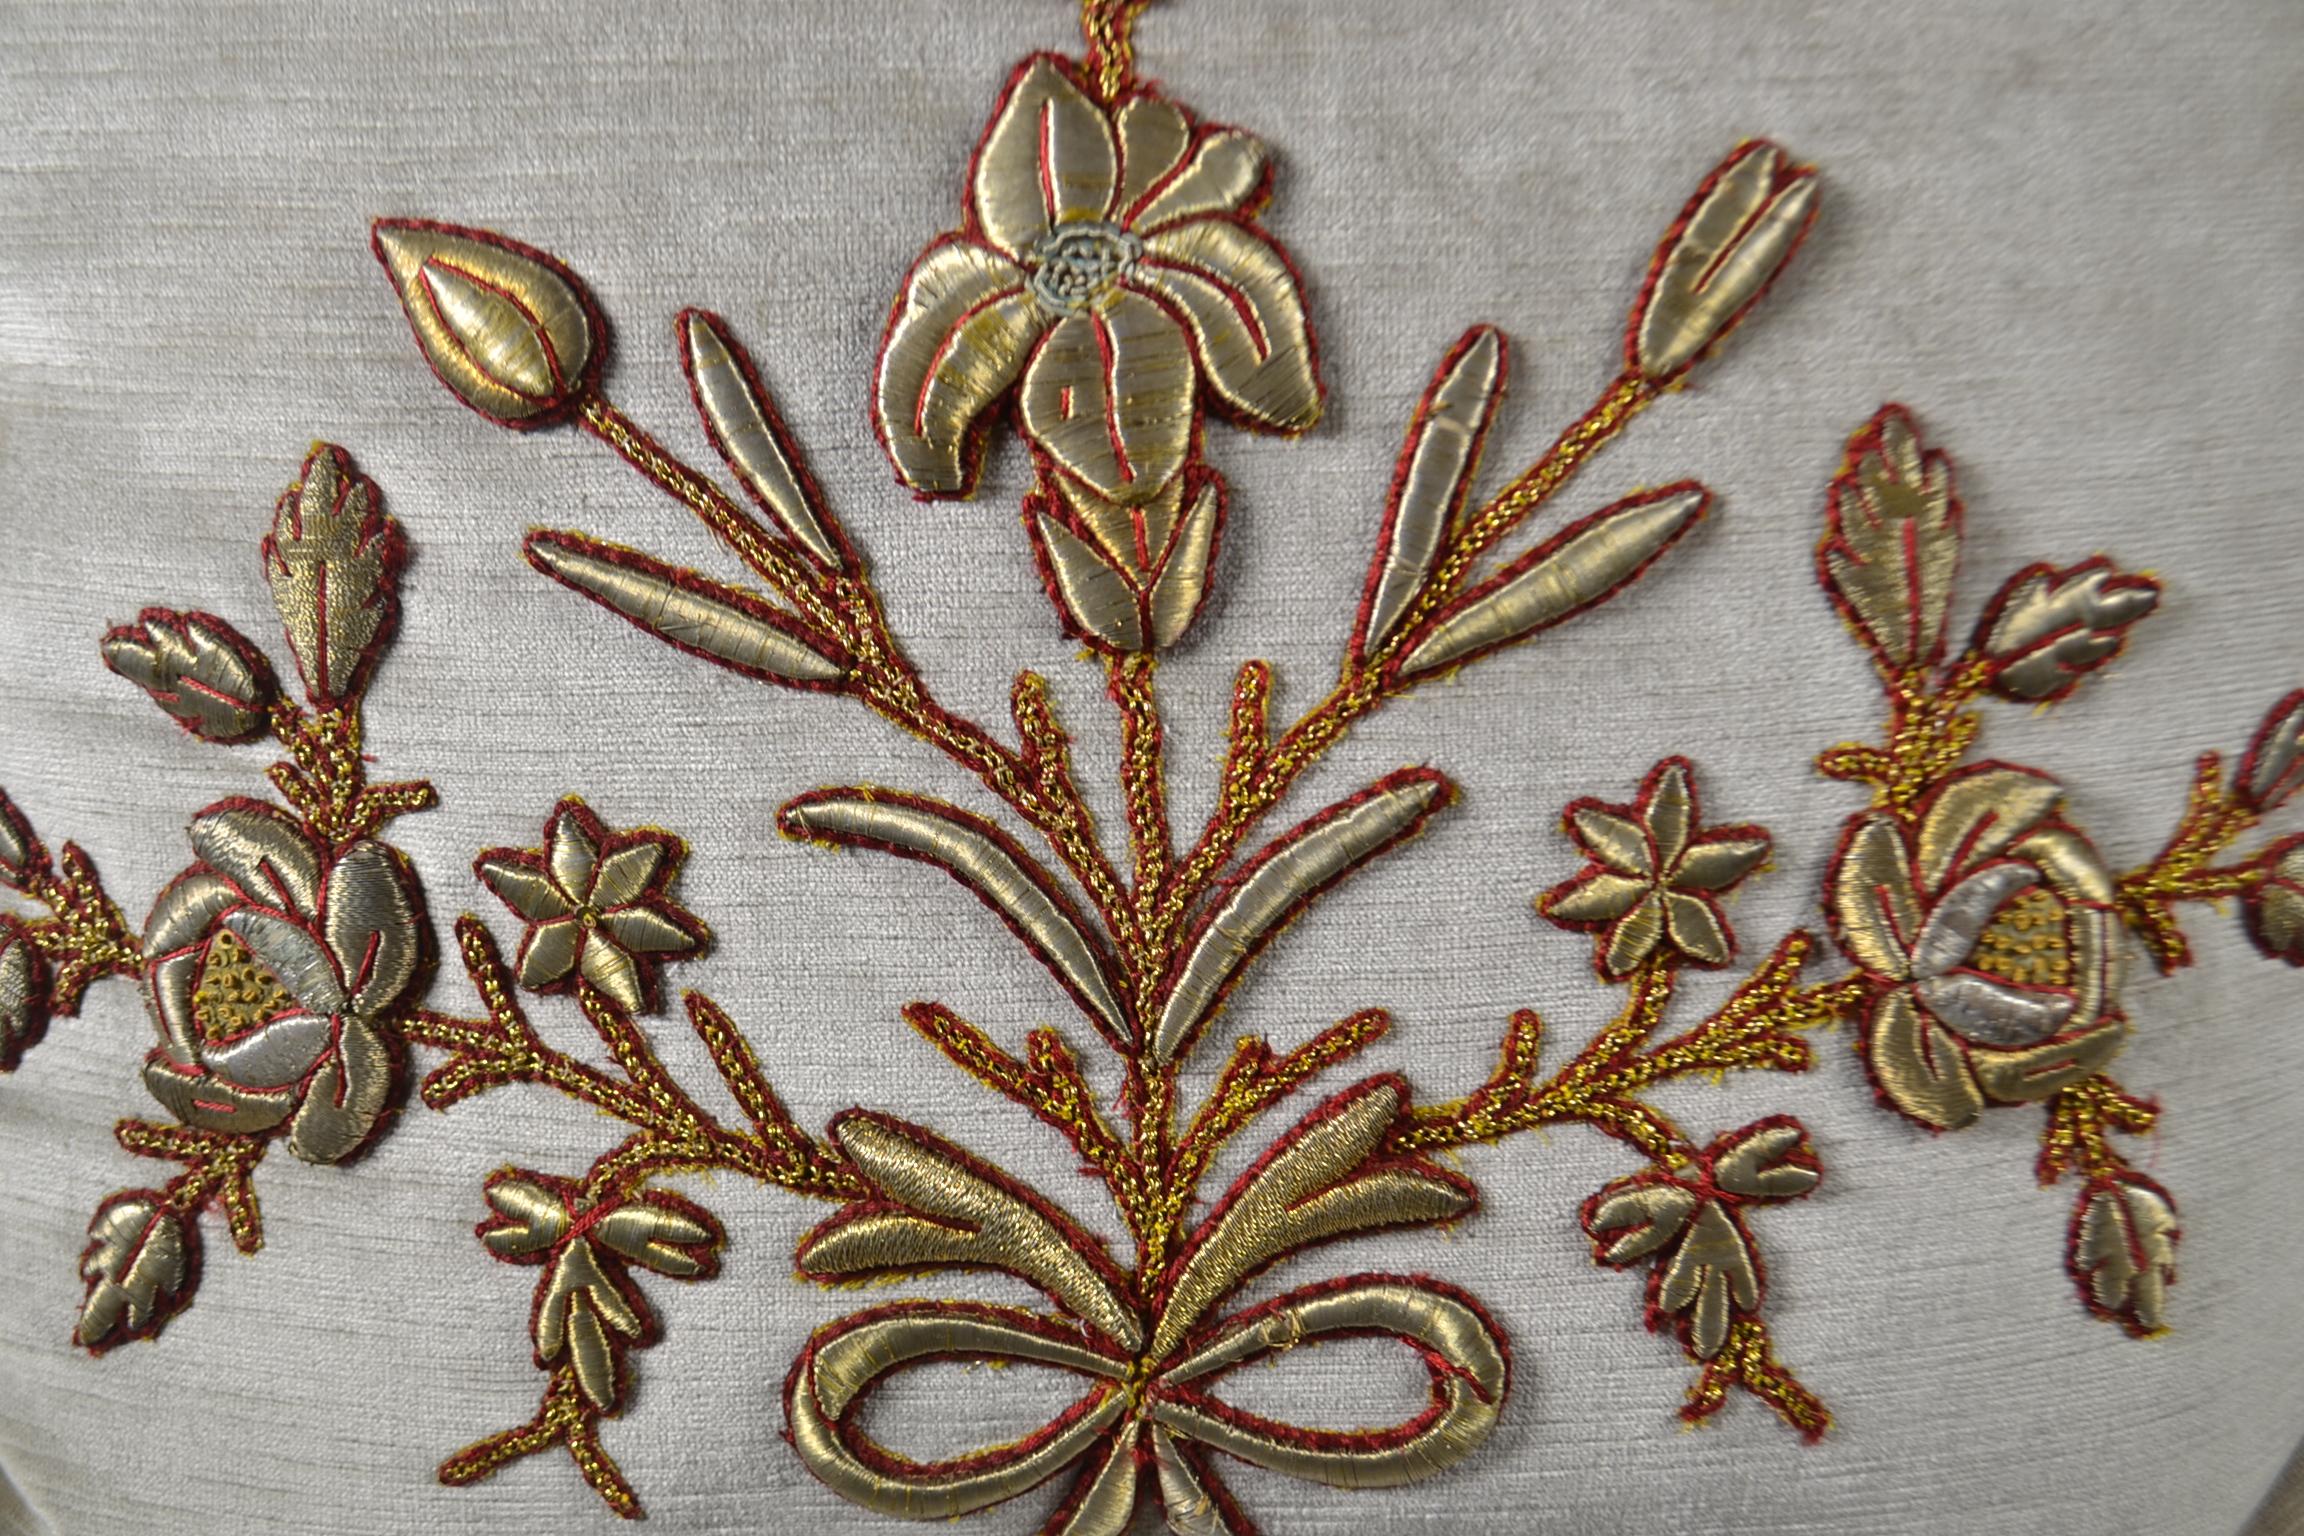 Pair of antique European raised gold metallic embroidery, couched with red silk thread on silver velvet. Hand trimmed with gold metallic cording knotted in the corners, down filled.